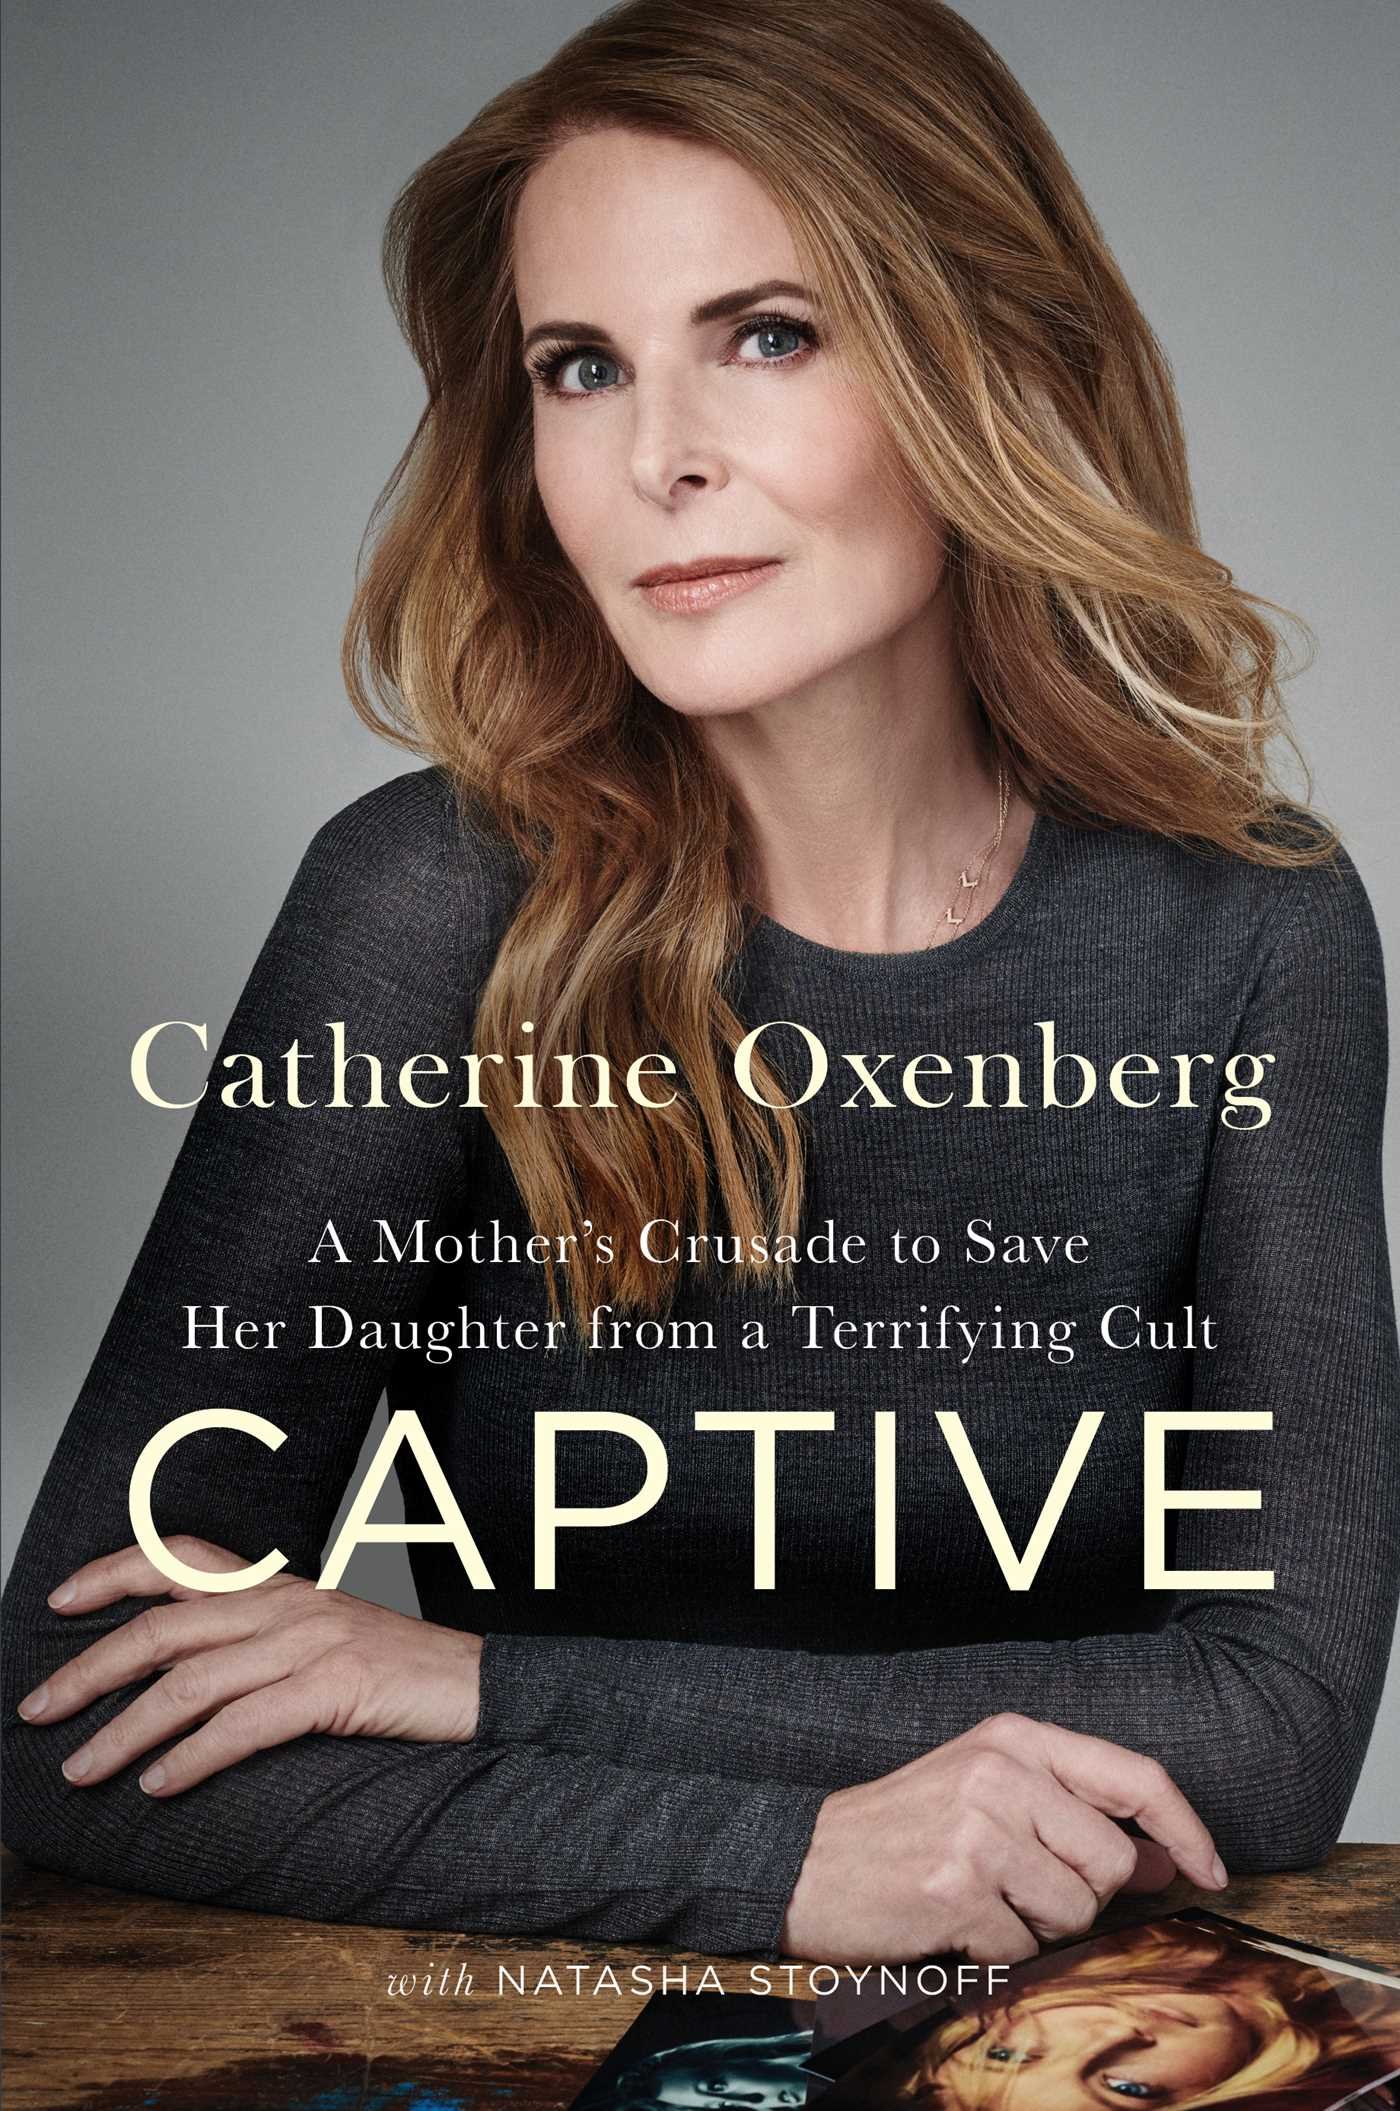 We will be discussing, Captive by Catherine Oxenberg